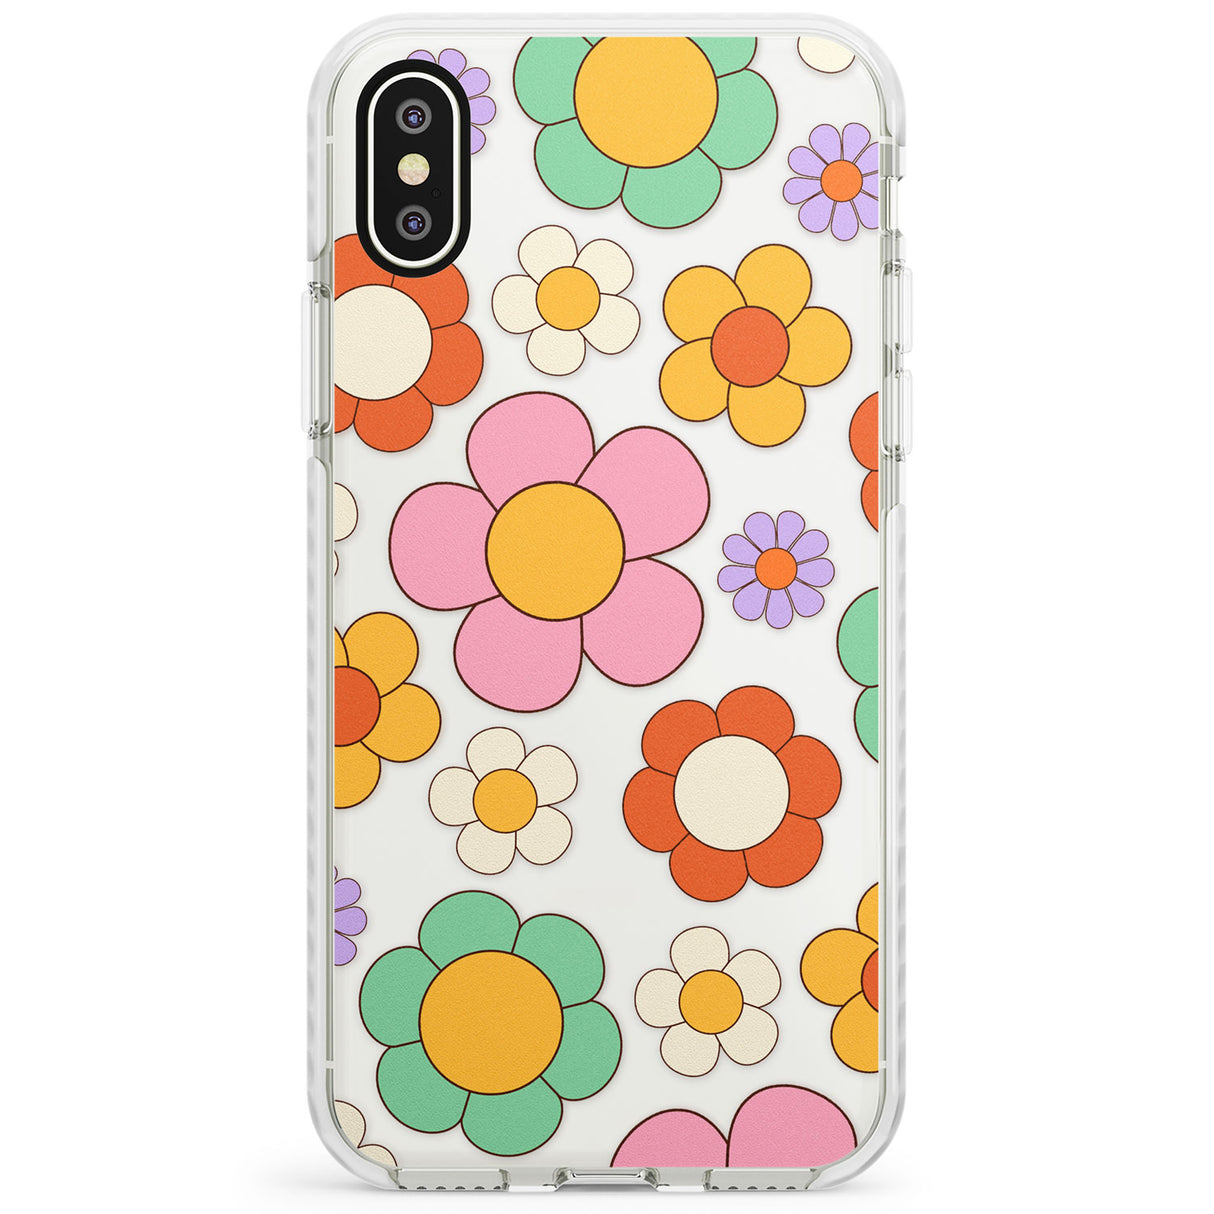 Groovy Blossoms Impact Phone Case for iPhone X XS Max XR